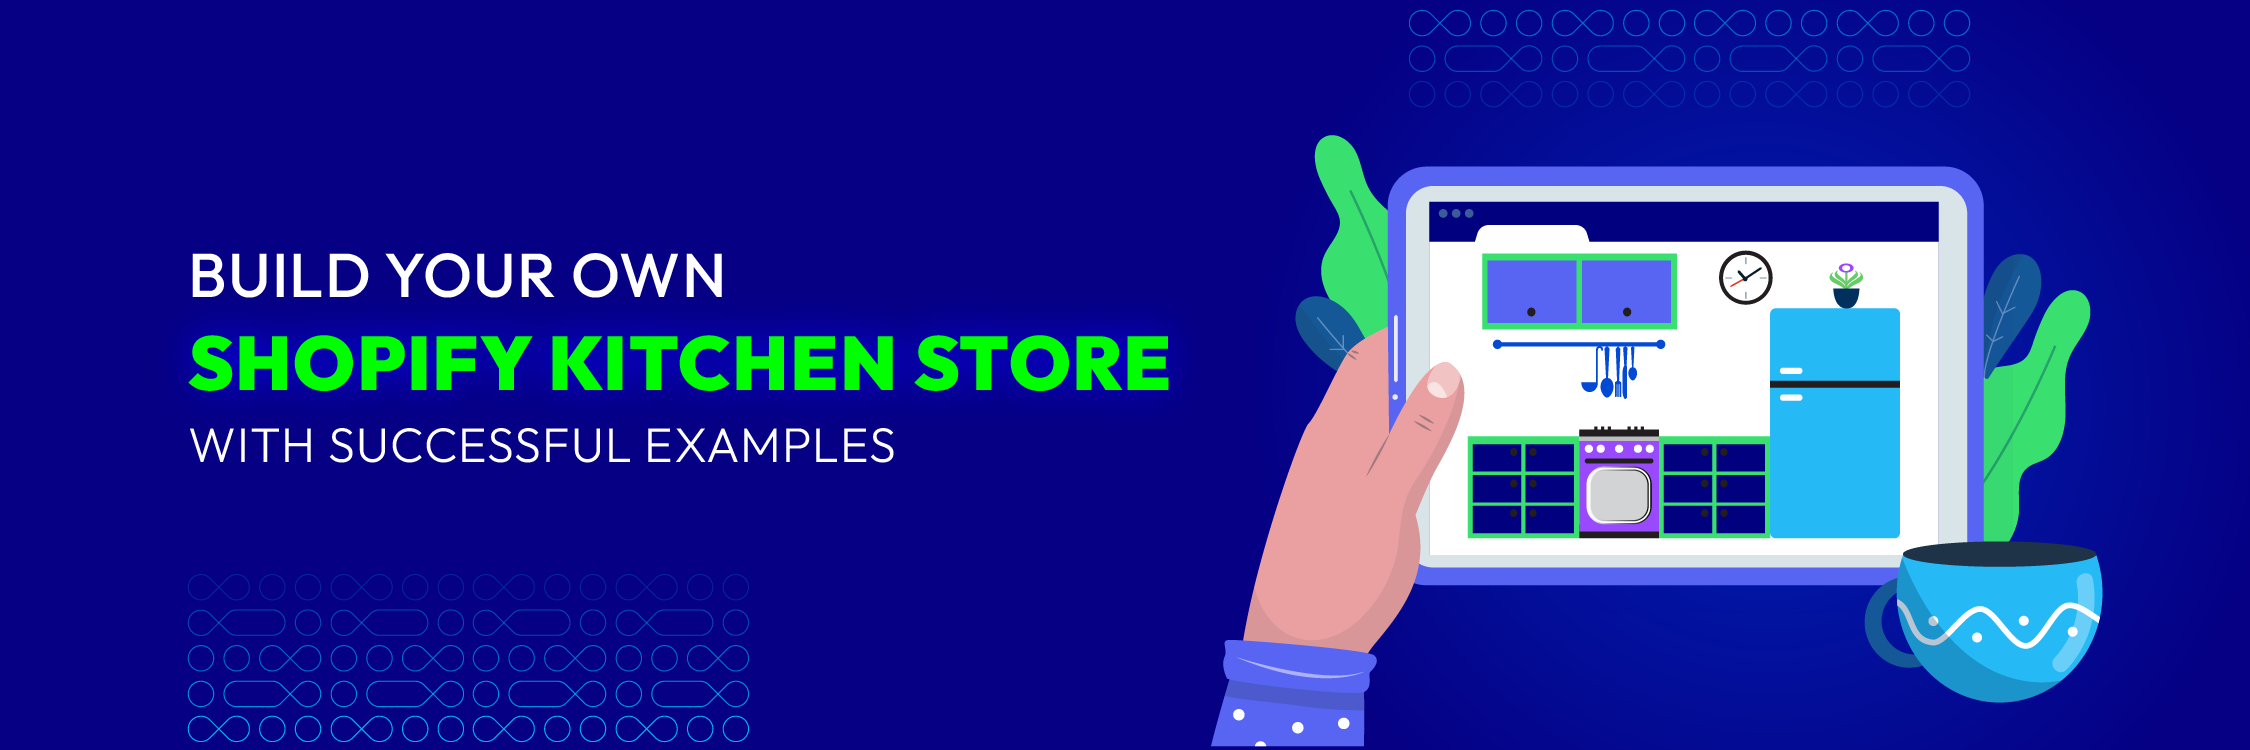 Build Your Own Shopify Kitchen Store With Successful Examples